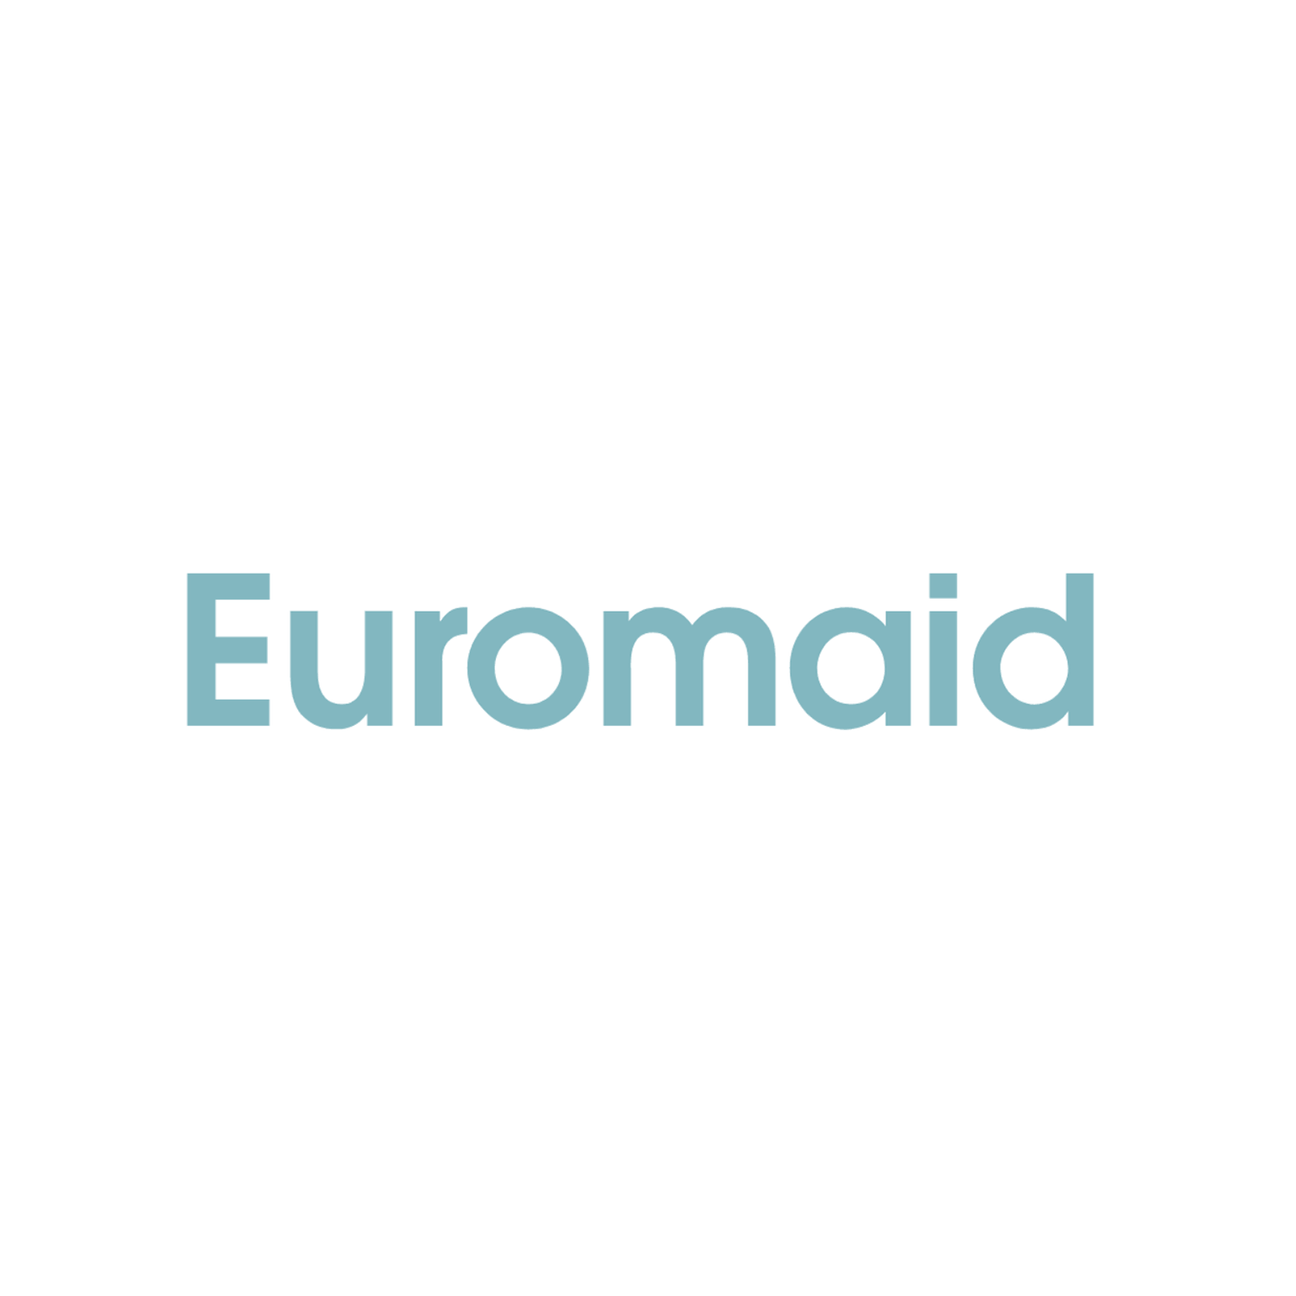 Euromaid Cooktop & Oven Parts - My Oven Spares